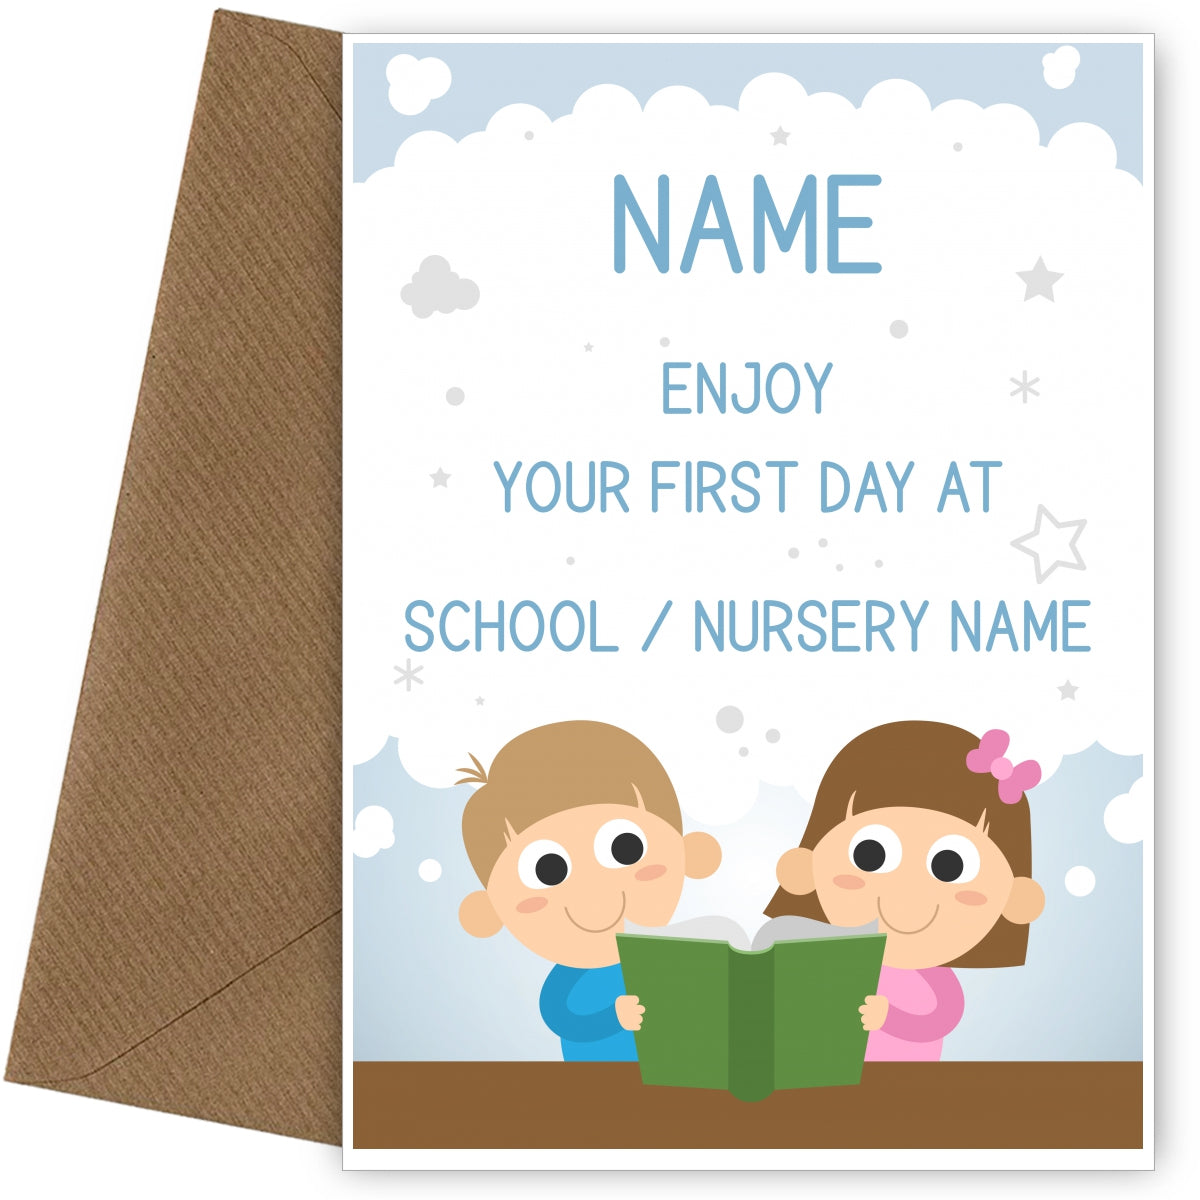 Enjoy First Day at School Card - 1st Day at NurseryEnjoy First Day at School Card - 1st Day at Nurse